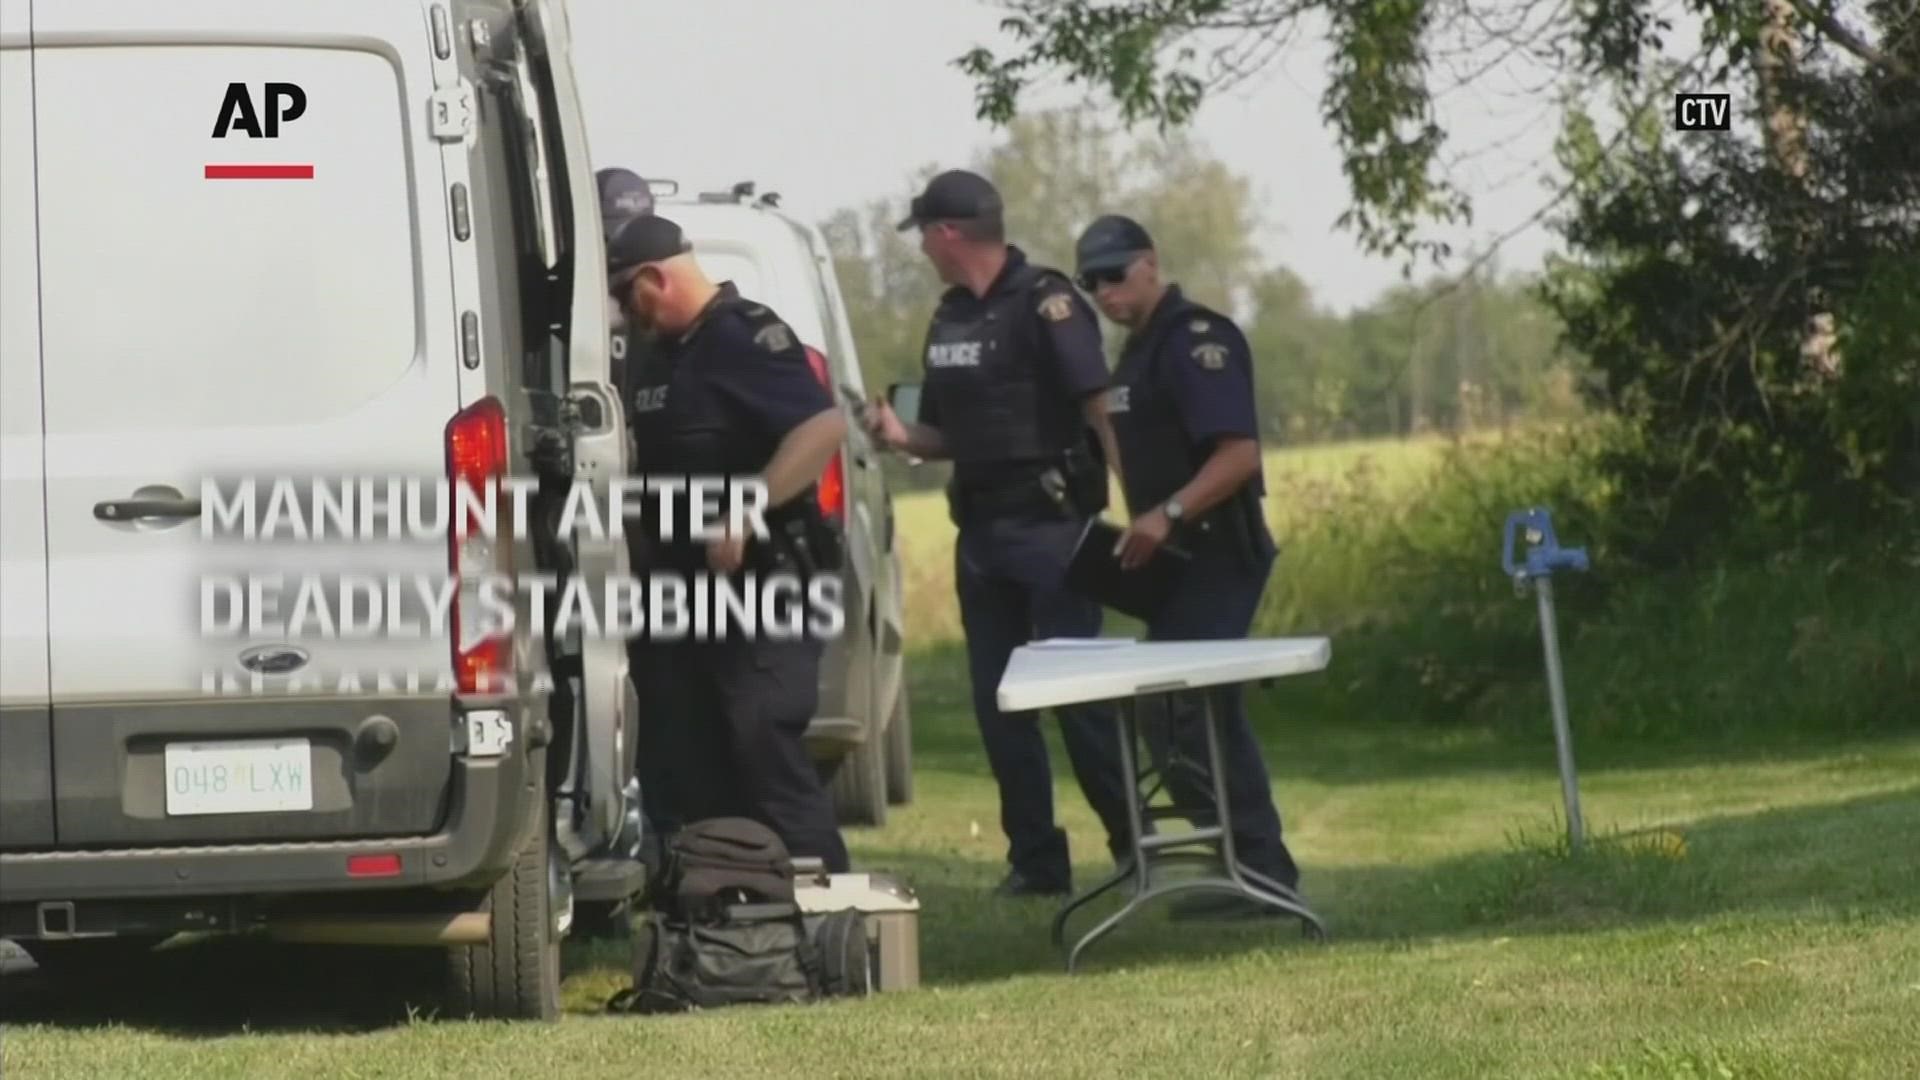 A series of stabbings at an Indigenous community and at another town nearby in Saskatchewan left 10 people dead and 15 wounded, Canadian police said Sunday.